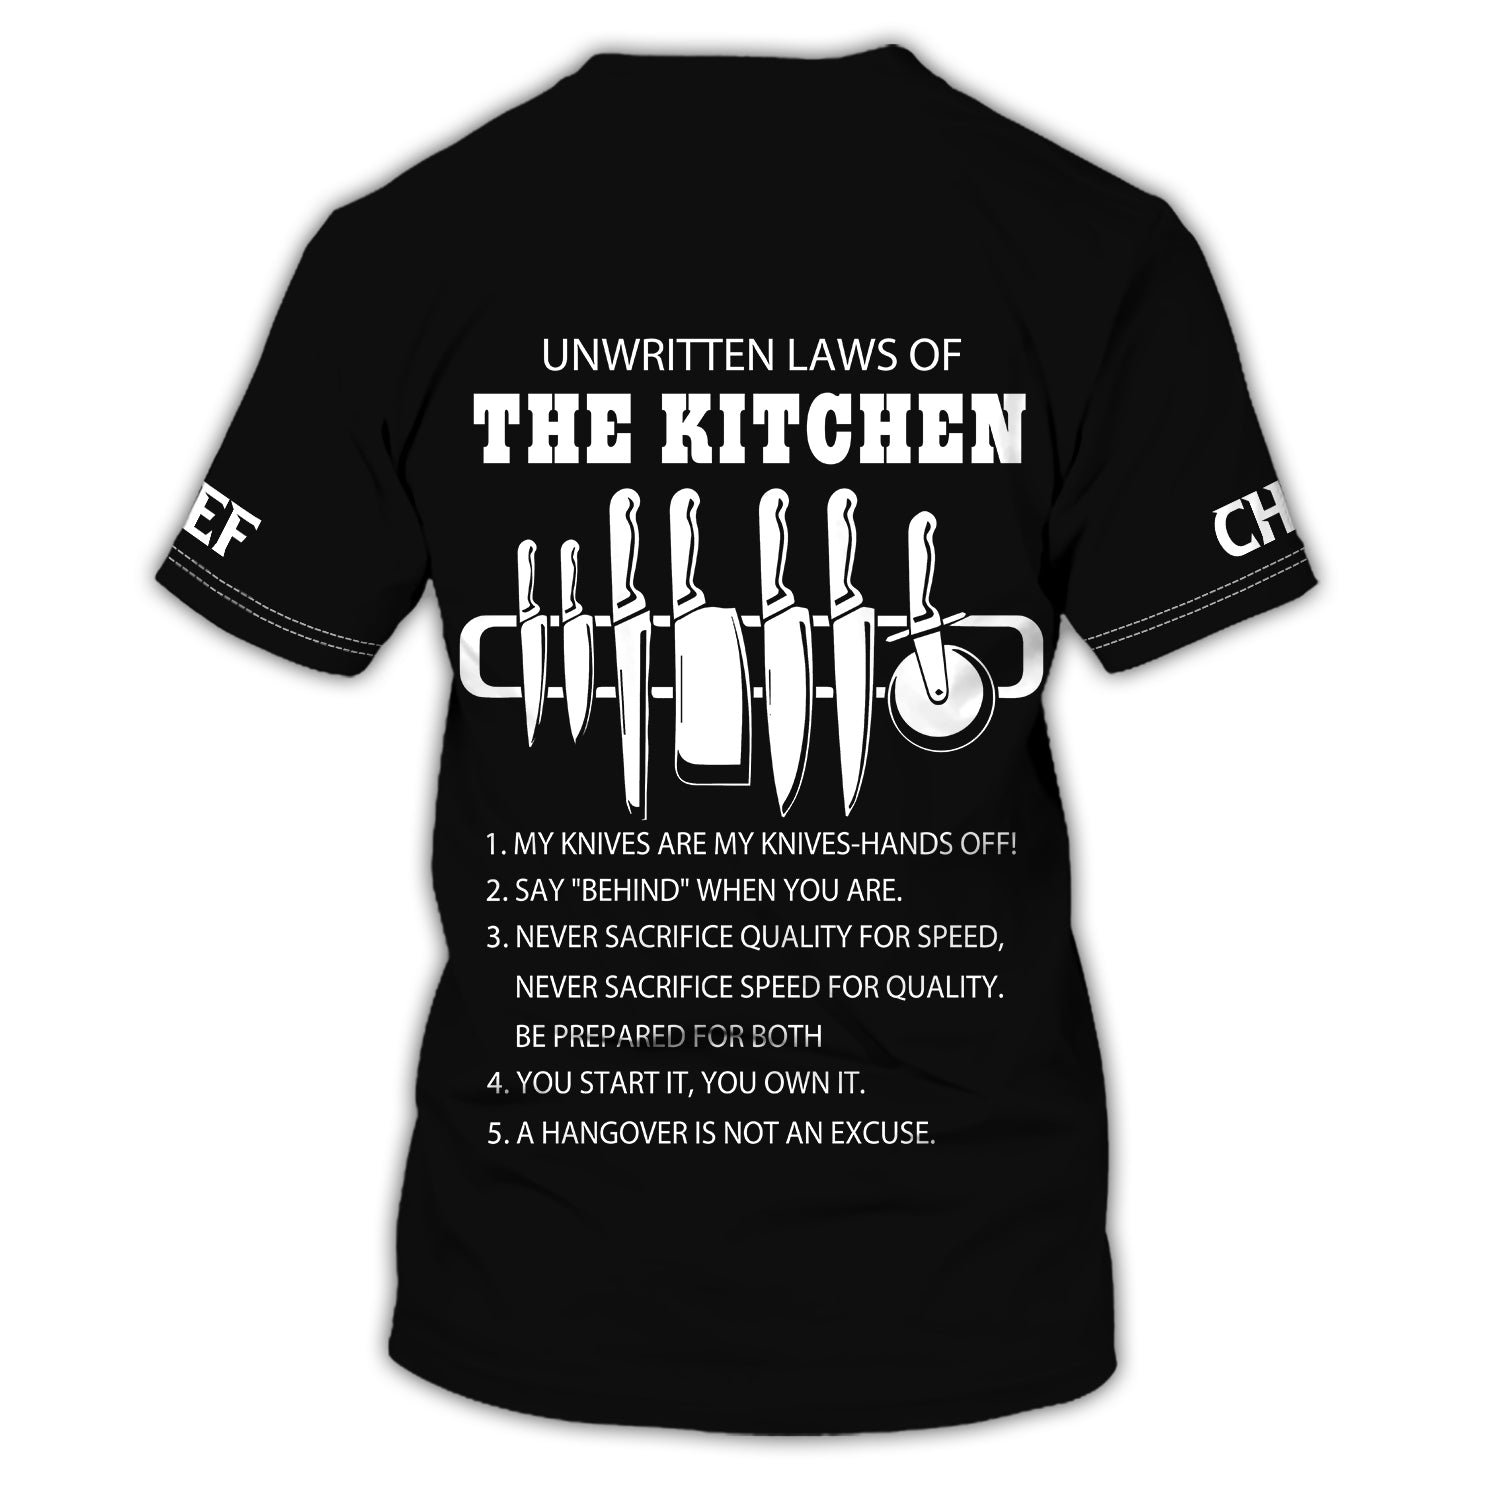 Chef Personalized Shirt Chef Apparel Chef Wear Cook Shirts Chef Uniform Black & White